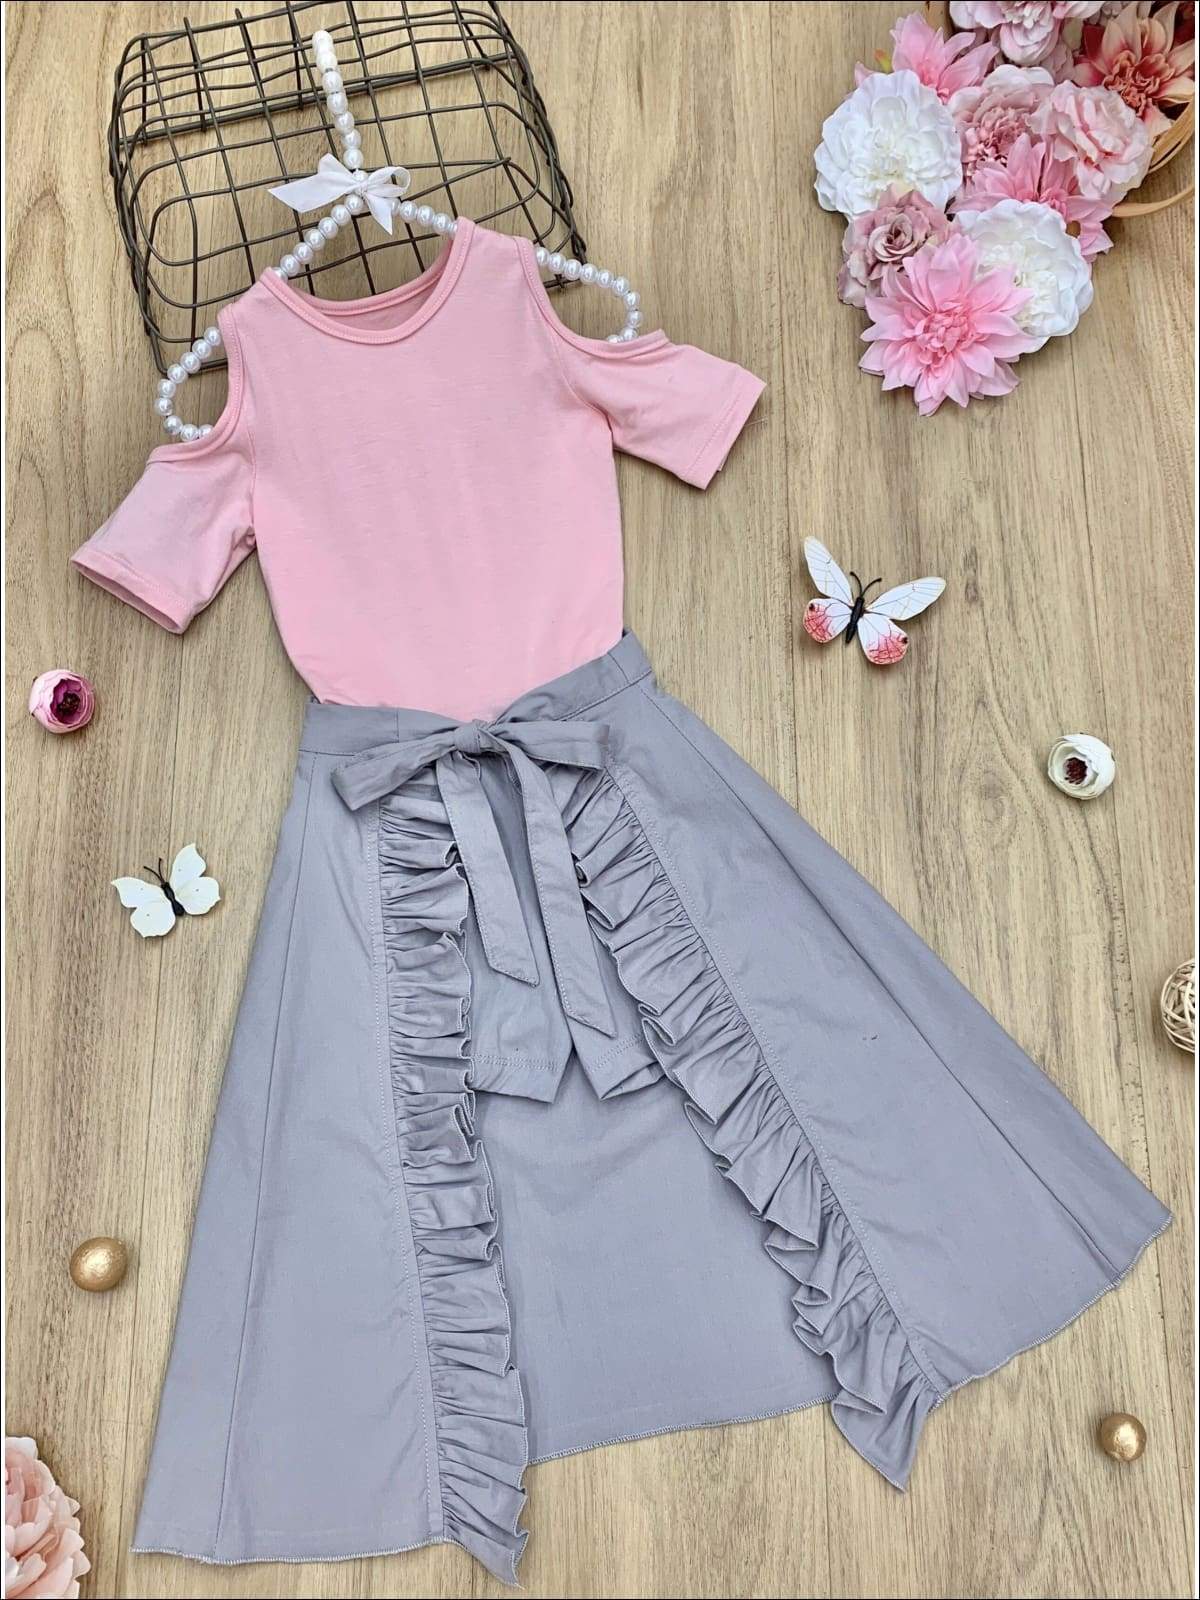 Girls Cold Shoulder Top and Ruffled Skirted Shorts Set - Grey / 2T/3T - Girls Spring Casual Set